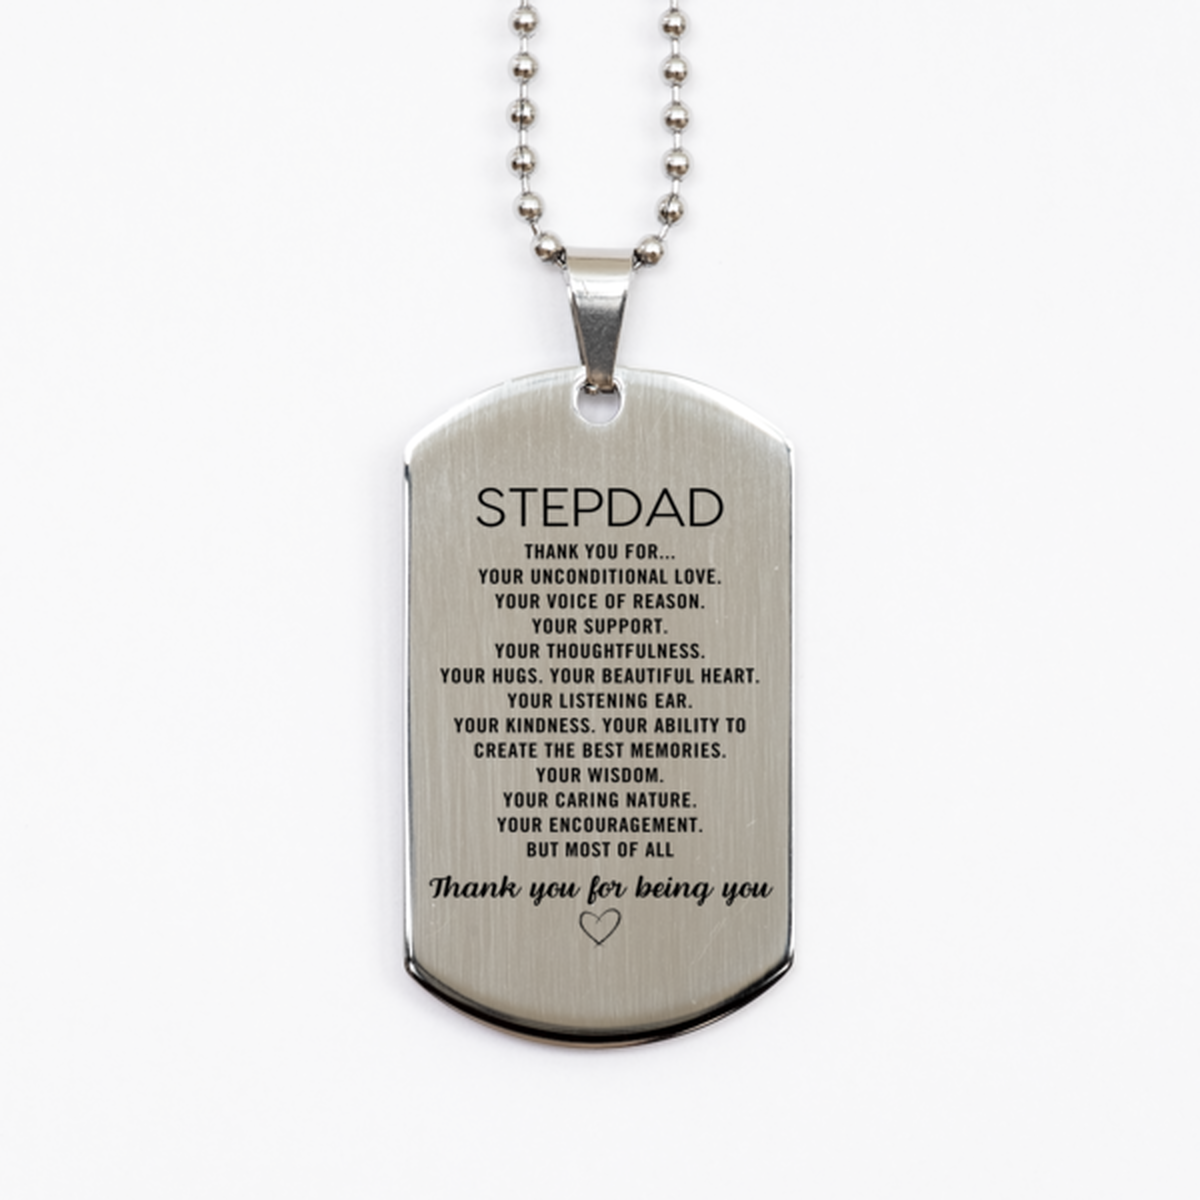 Stepdad Silver Dog Tag Custom, Engraved Gifts For Stepdad Christmas Graduation Birthday Gifts for Men Women Stepdad Thank you for Your unconditional love